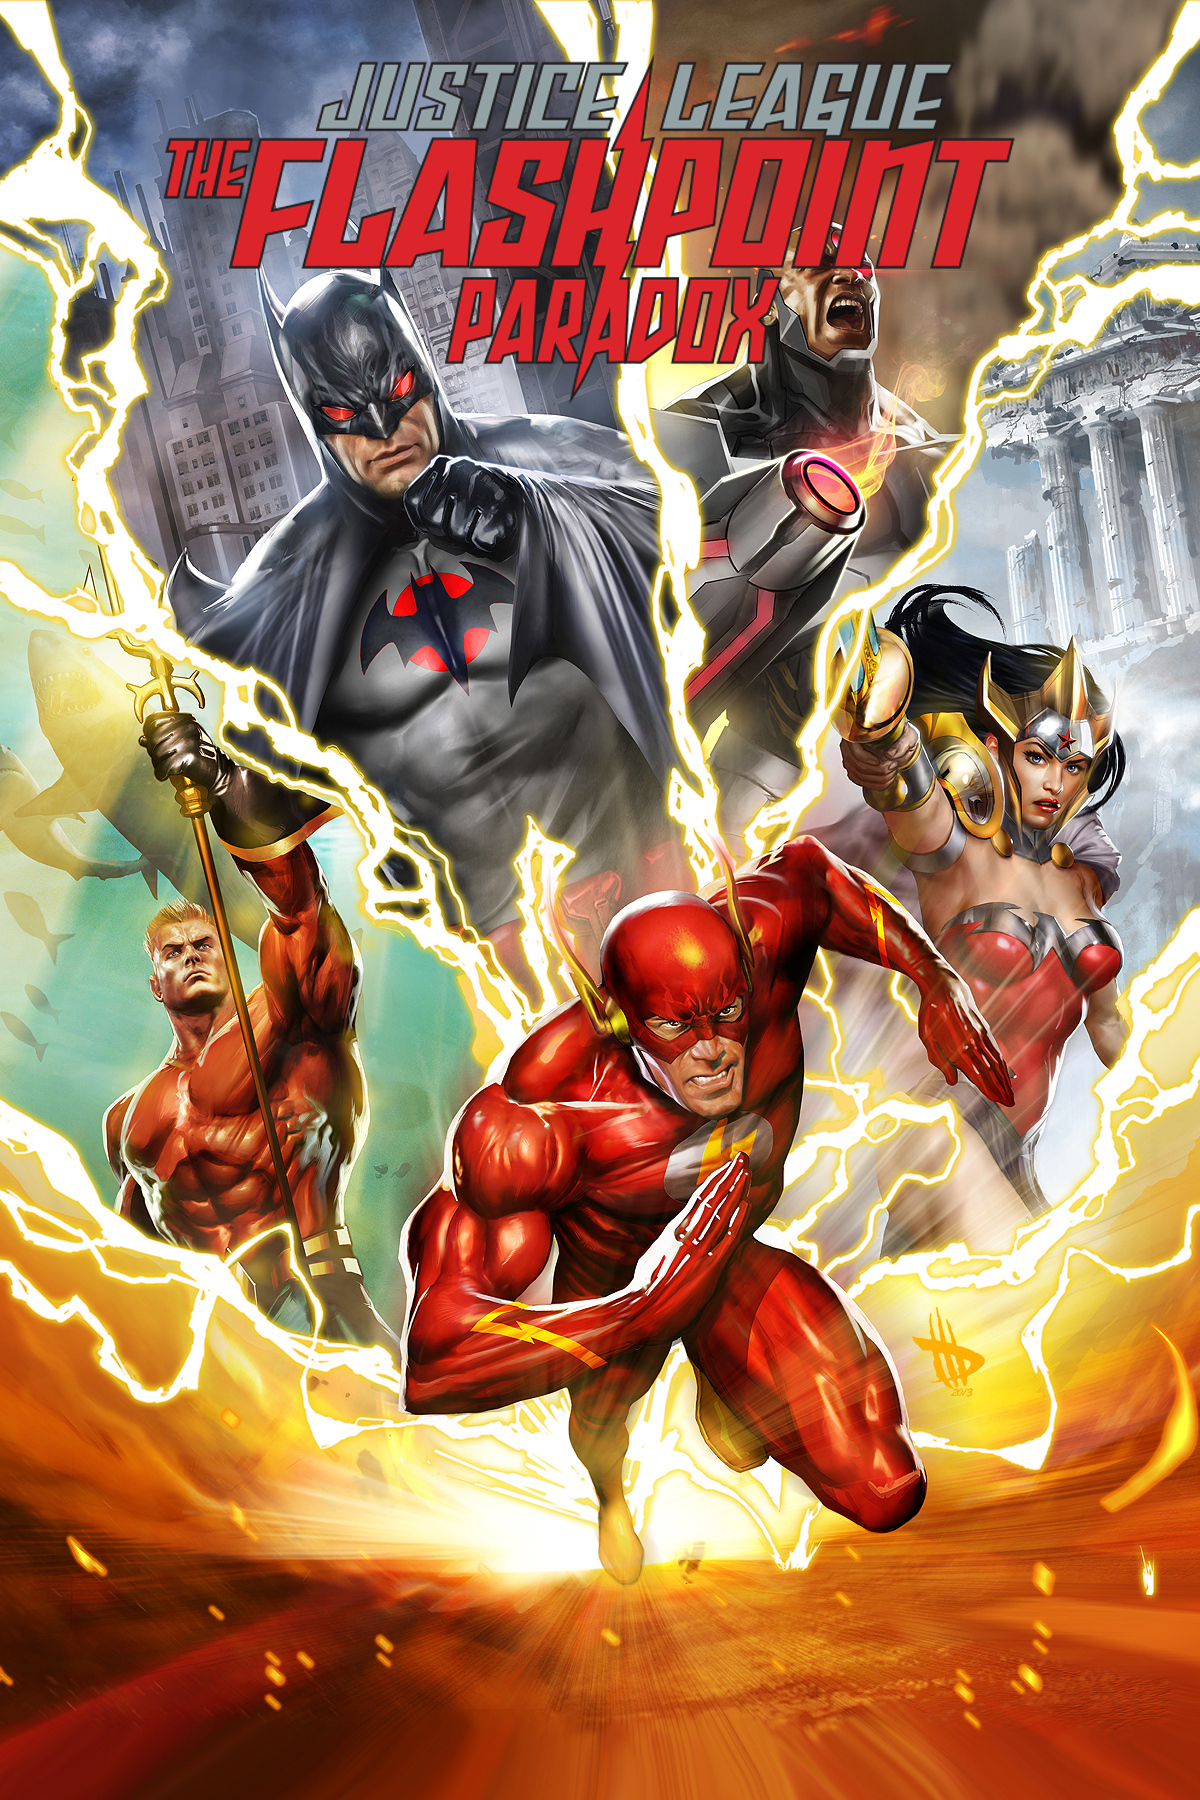 Justice League: The Flashpoint Paradox #8